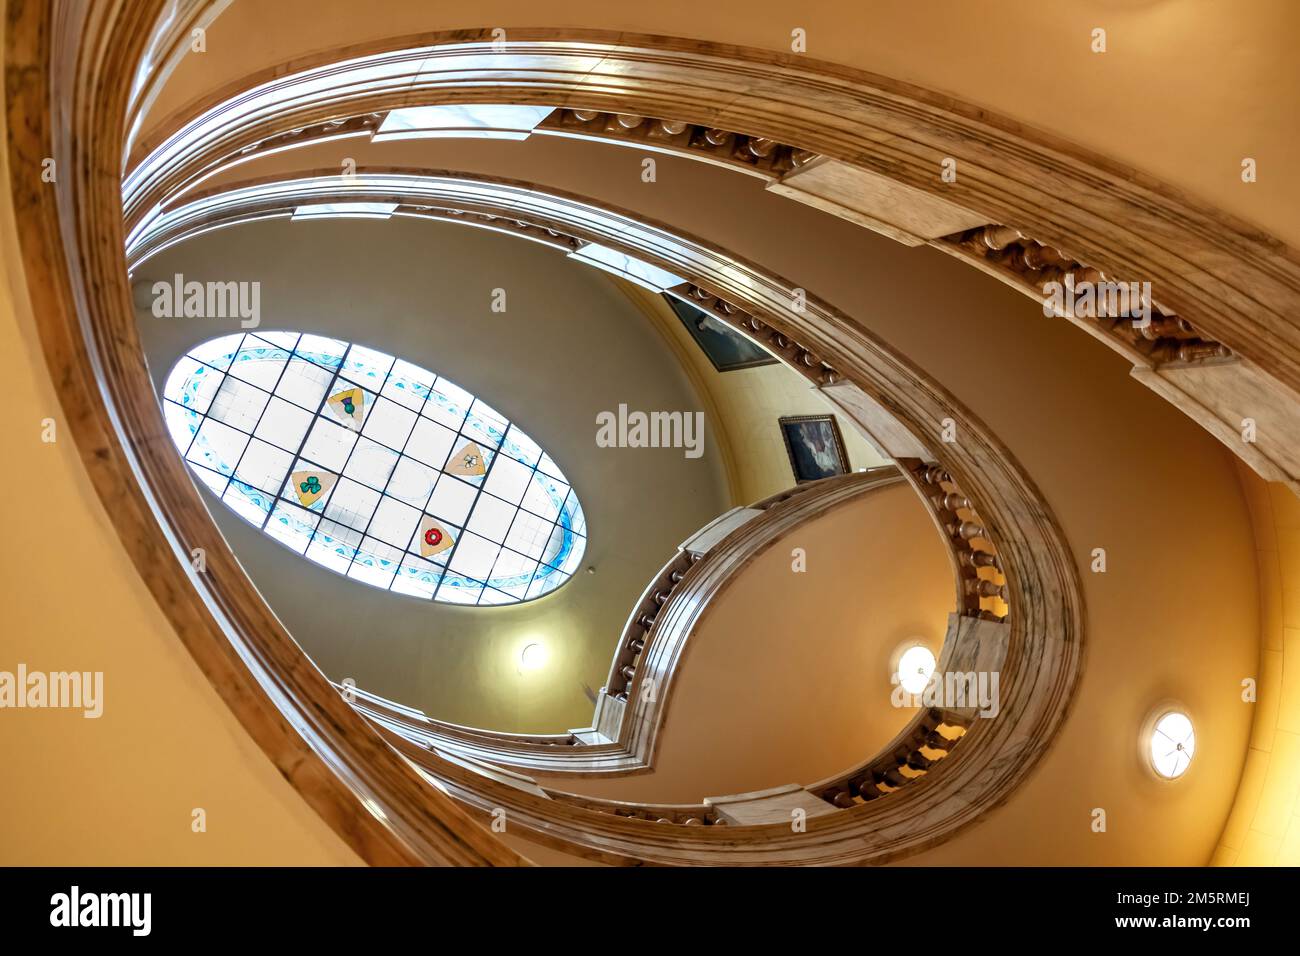 The spiral staircase at The Royal Horseguards Hotel, London Stock Photo